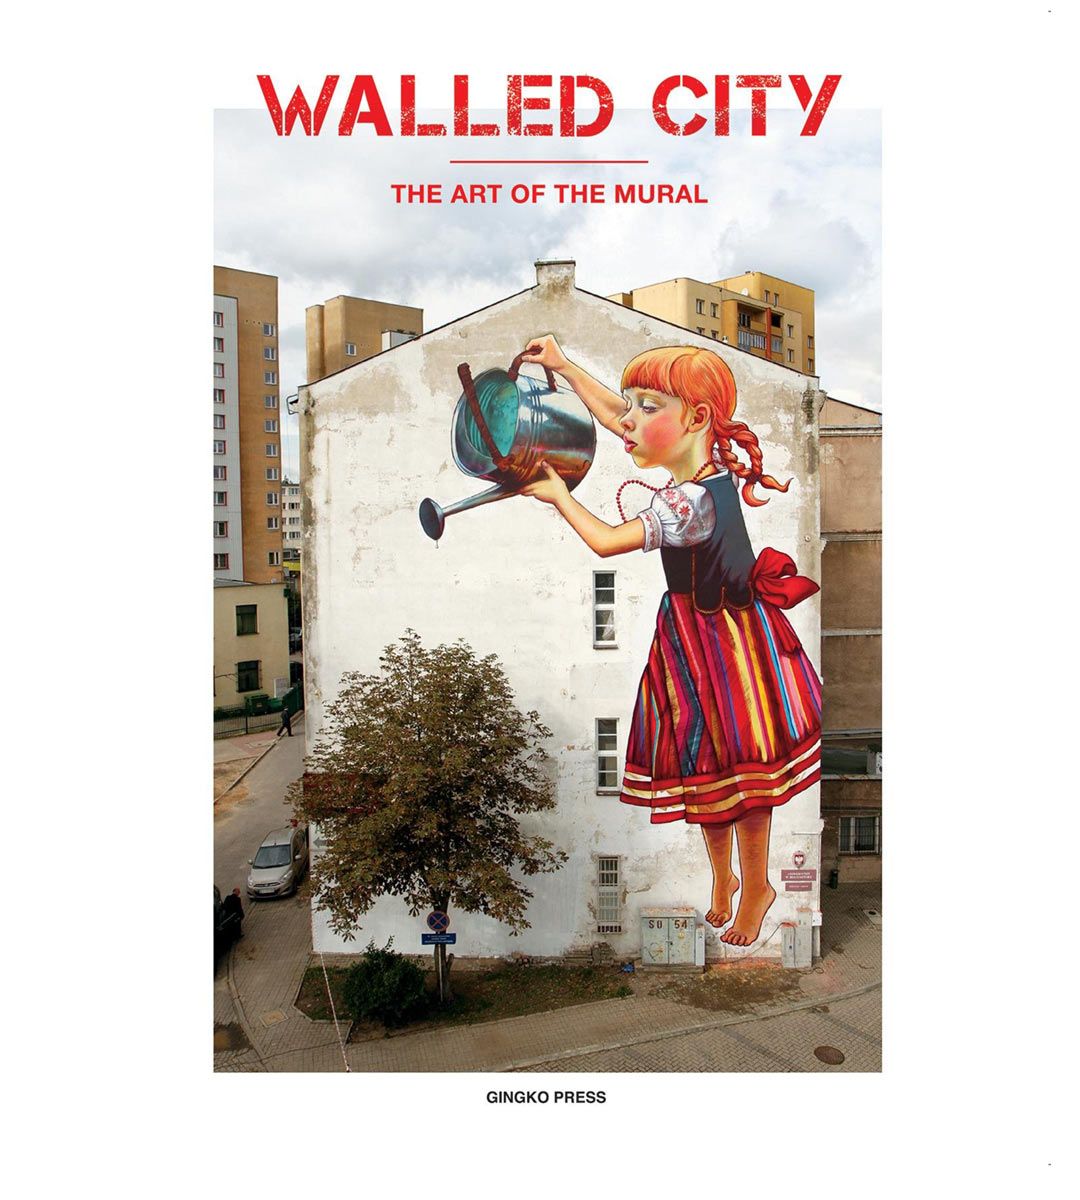 Walled City, the art of the mural